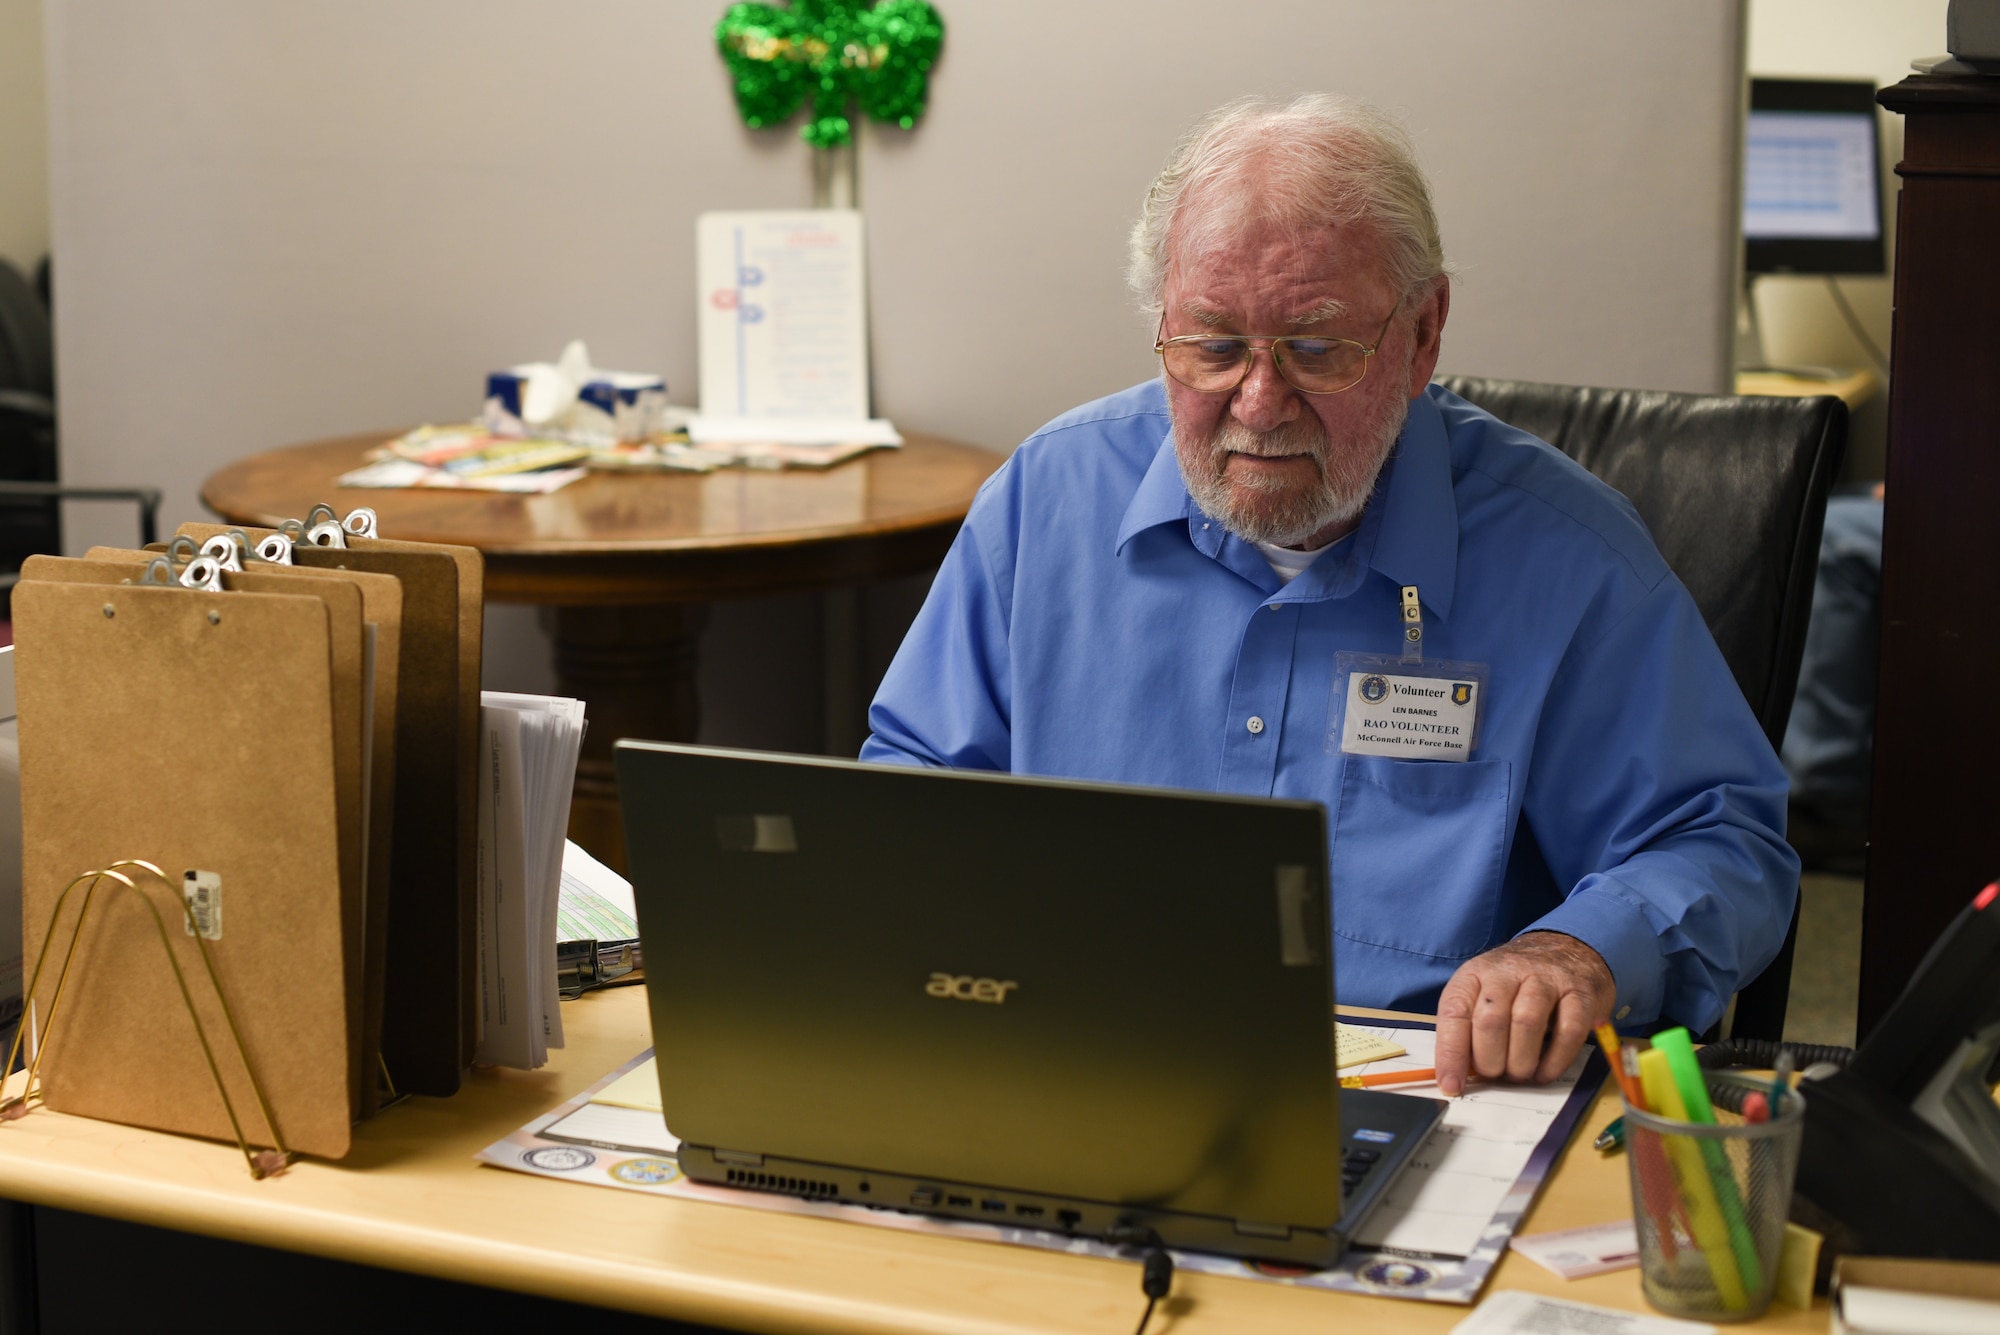 MCCONNELL AIR FORCE BASE, Kan.-- Len Barnes, volunteer tax accountant, sits at the tax center front desk, March 5, 2019, at McConnell Air Force Base, Kan. Barnes is one of the 14 volunteers who endured 40 hours of training to become a tax center volunteer. (U.S. Air Force photo by Airman 1st Class Alexi Myrick)